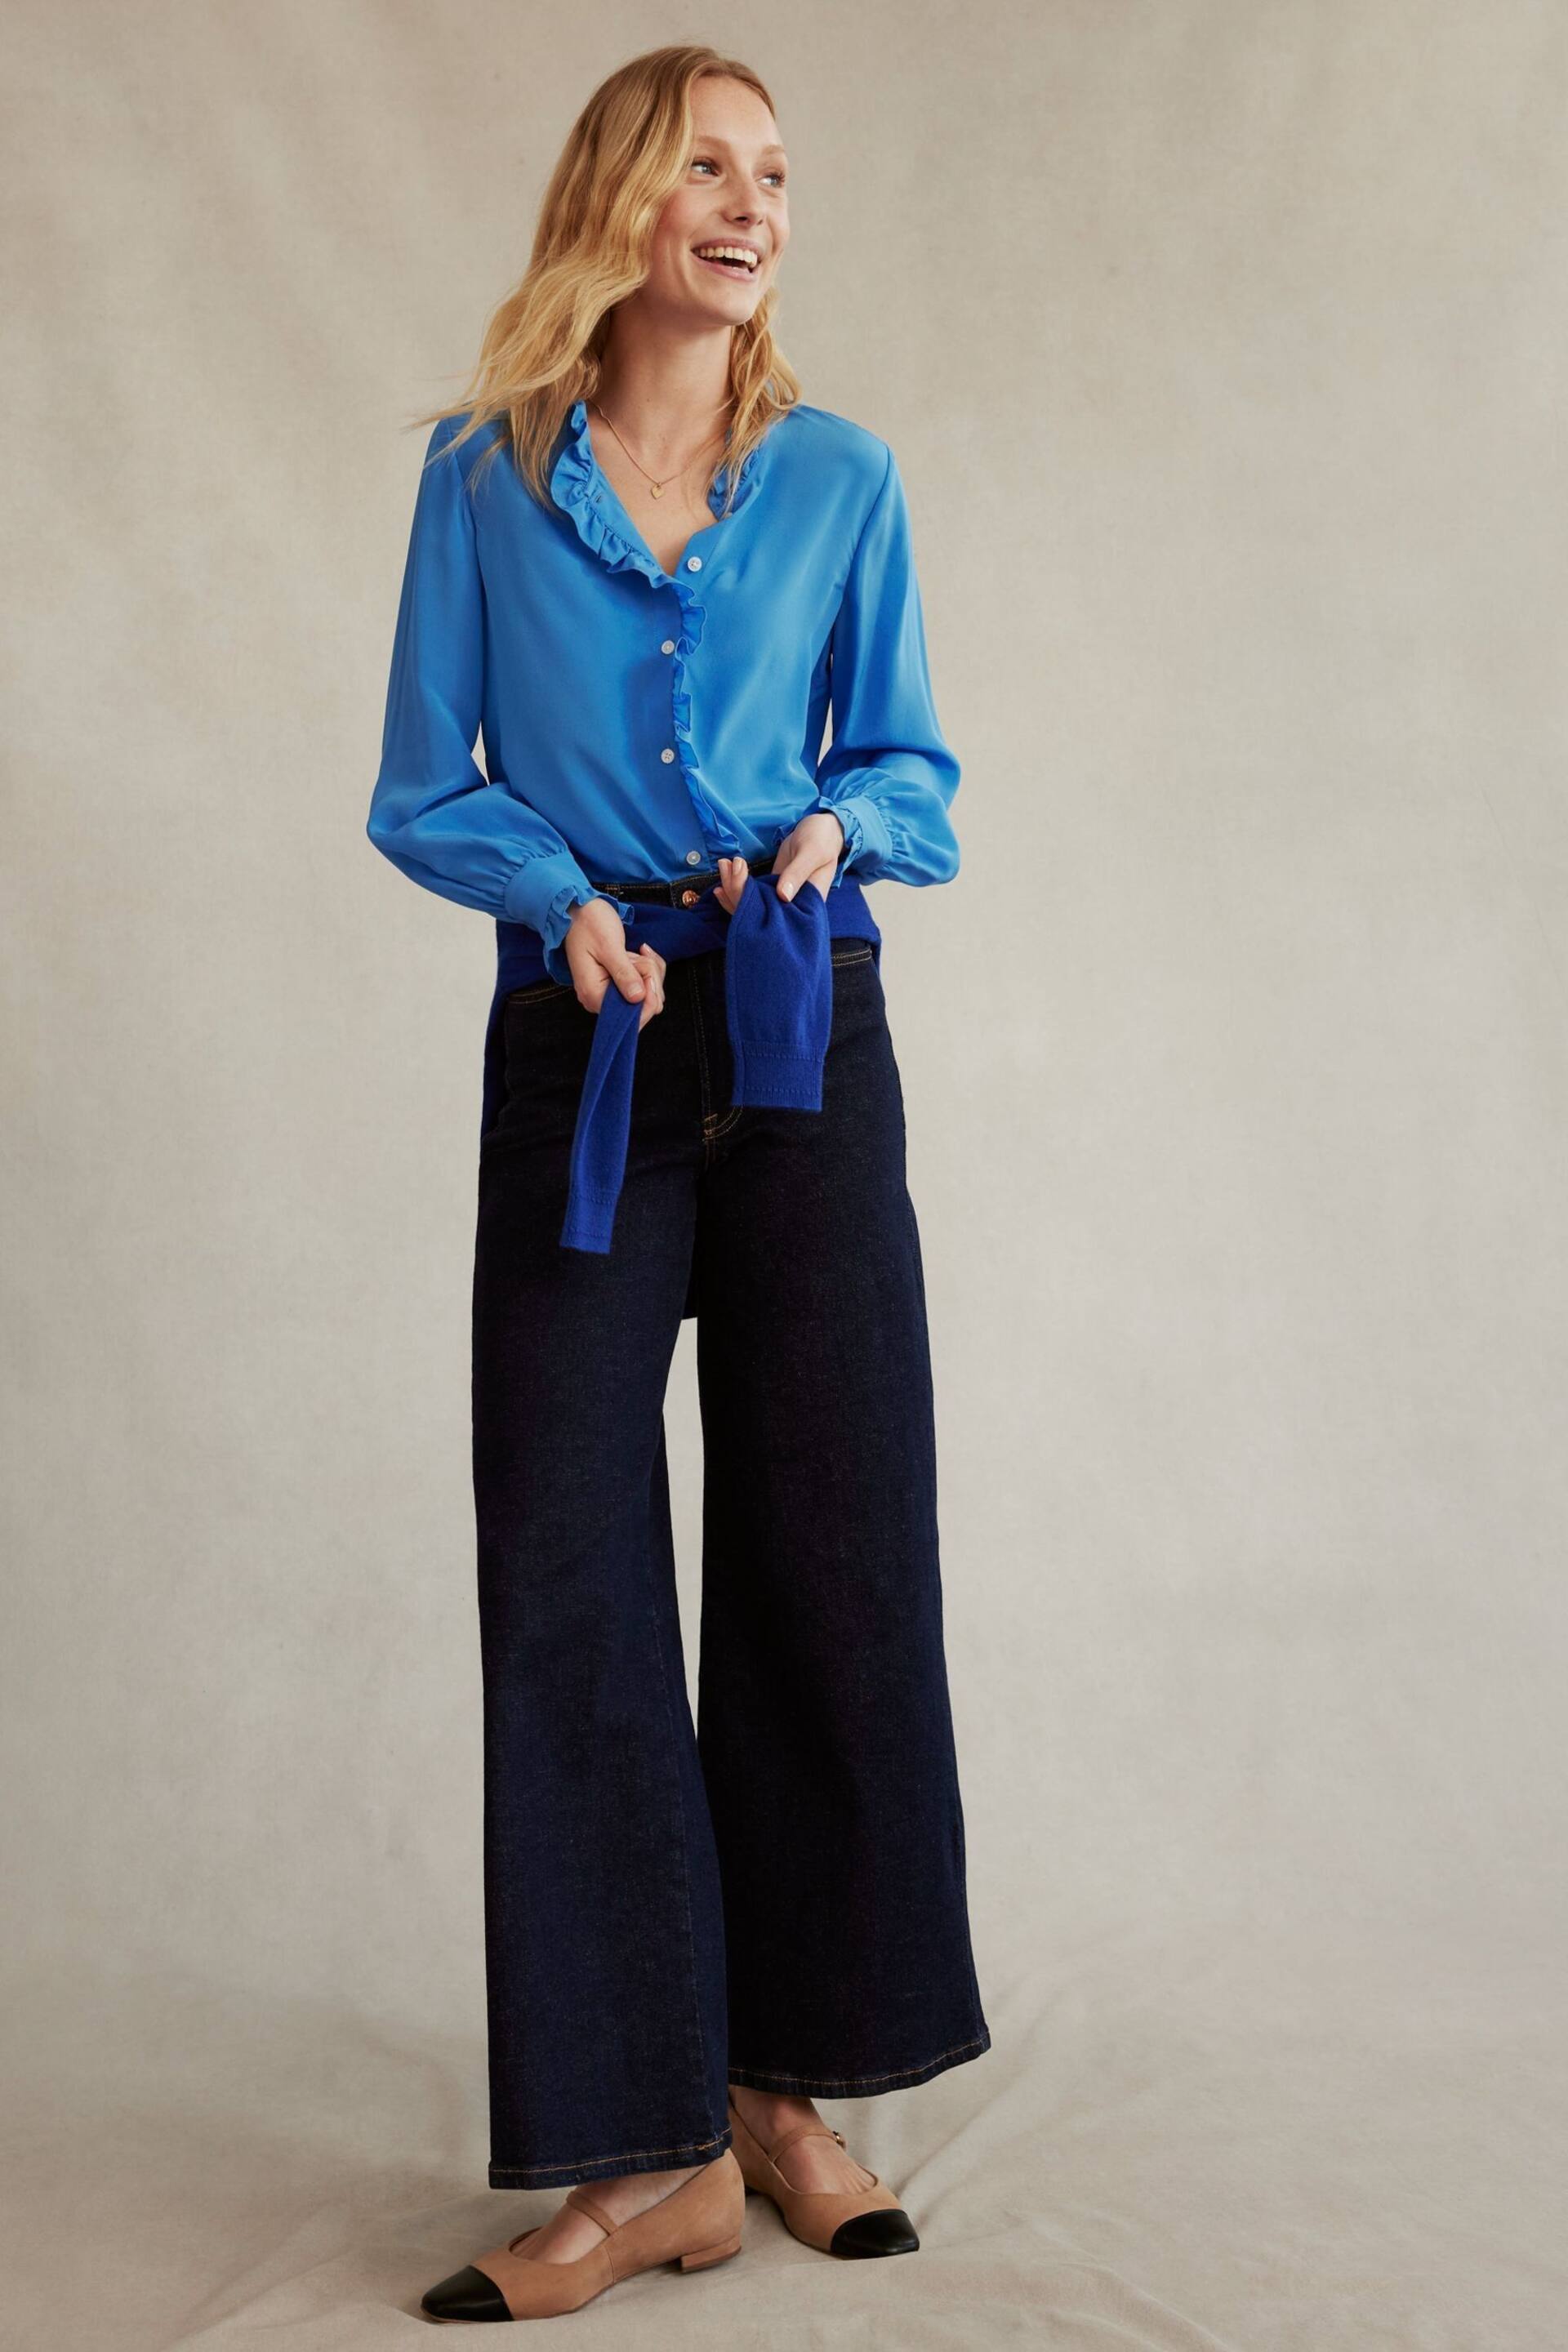 Boden Blue High Rise Wide Leg Jeans - Image 1 of 4